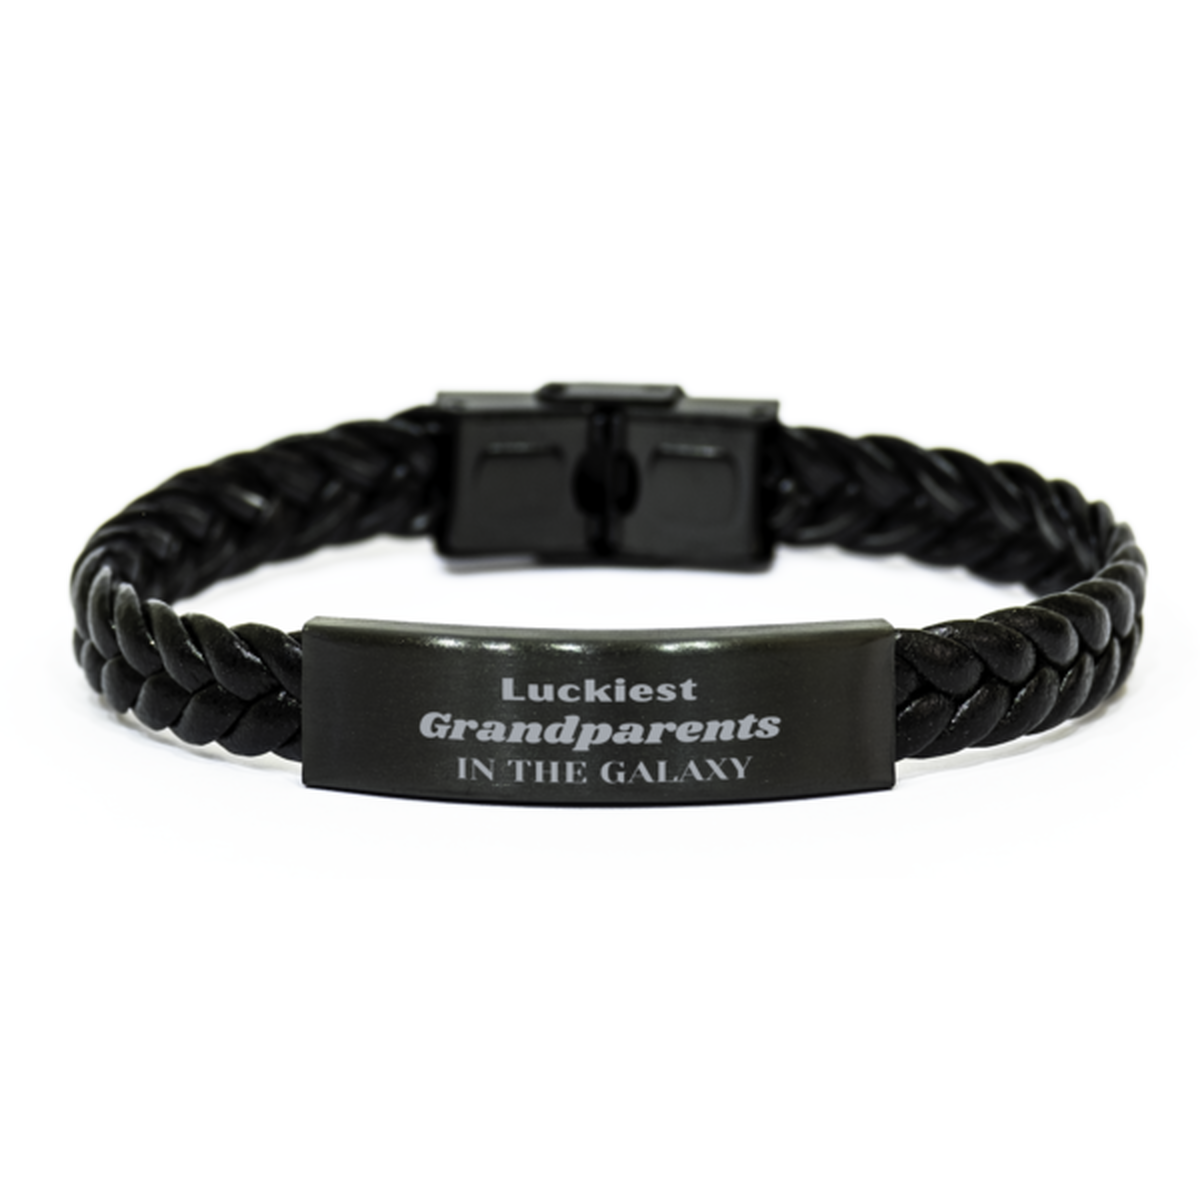 Luckiest Grandparents in the Galaxy, To My Grandparents Engraved Gifts, Christmas Grandparents Braided Leather Bracelet Gifts, X-mas Birthday Unique Gifts For Grandparents Men Women